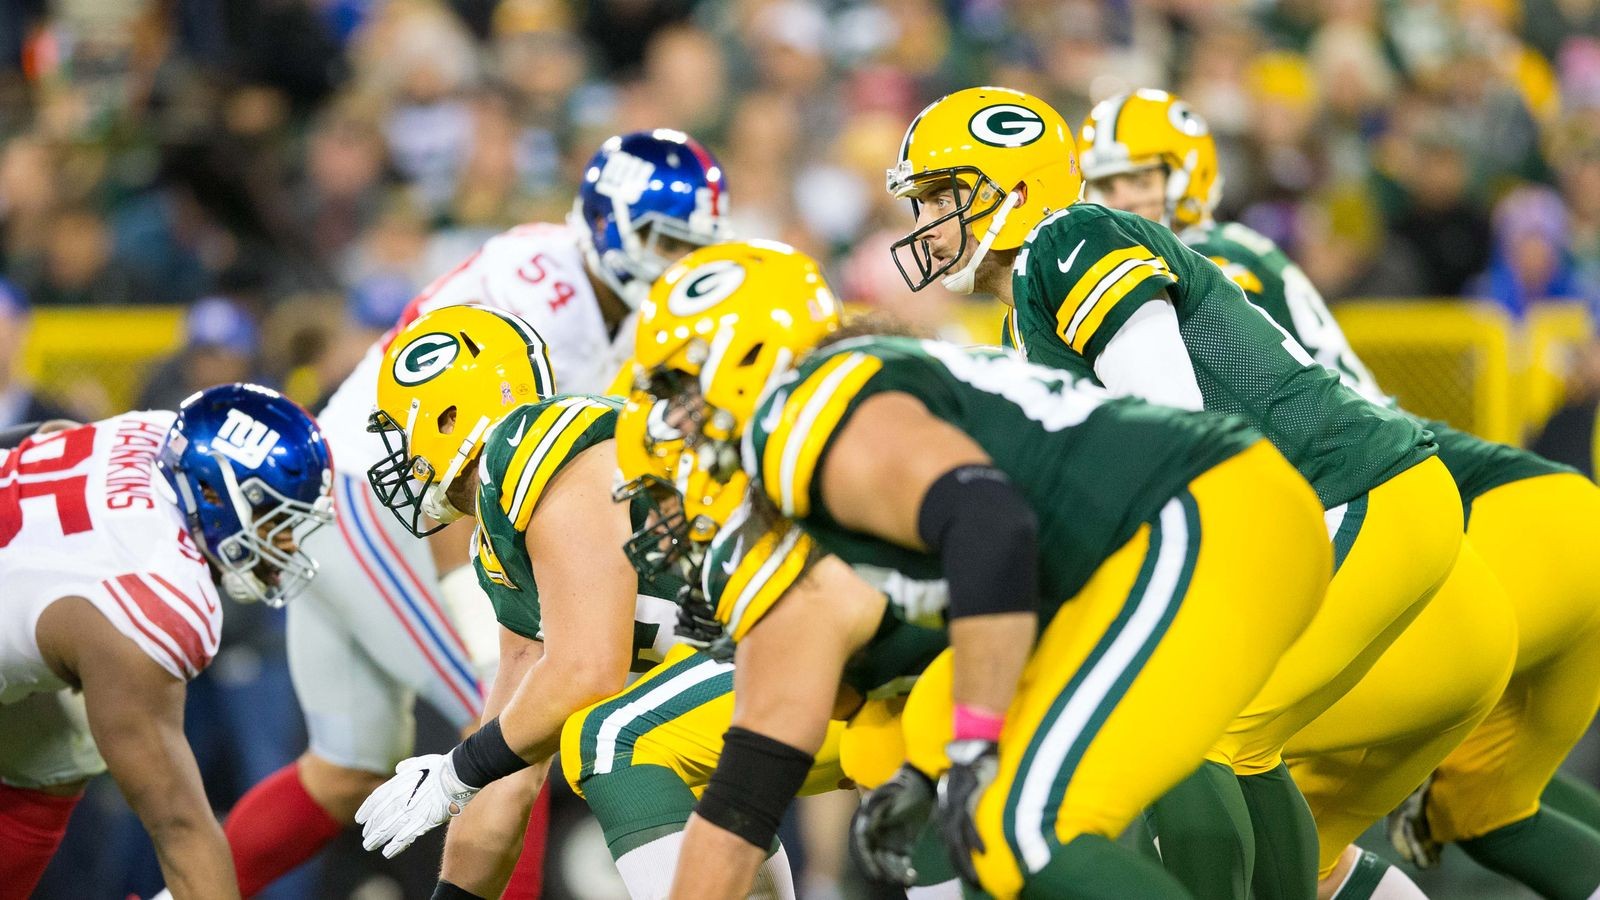 NFL Playoff Schedule 2017 Packers host Giants on Wild Card Sunday